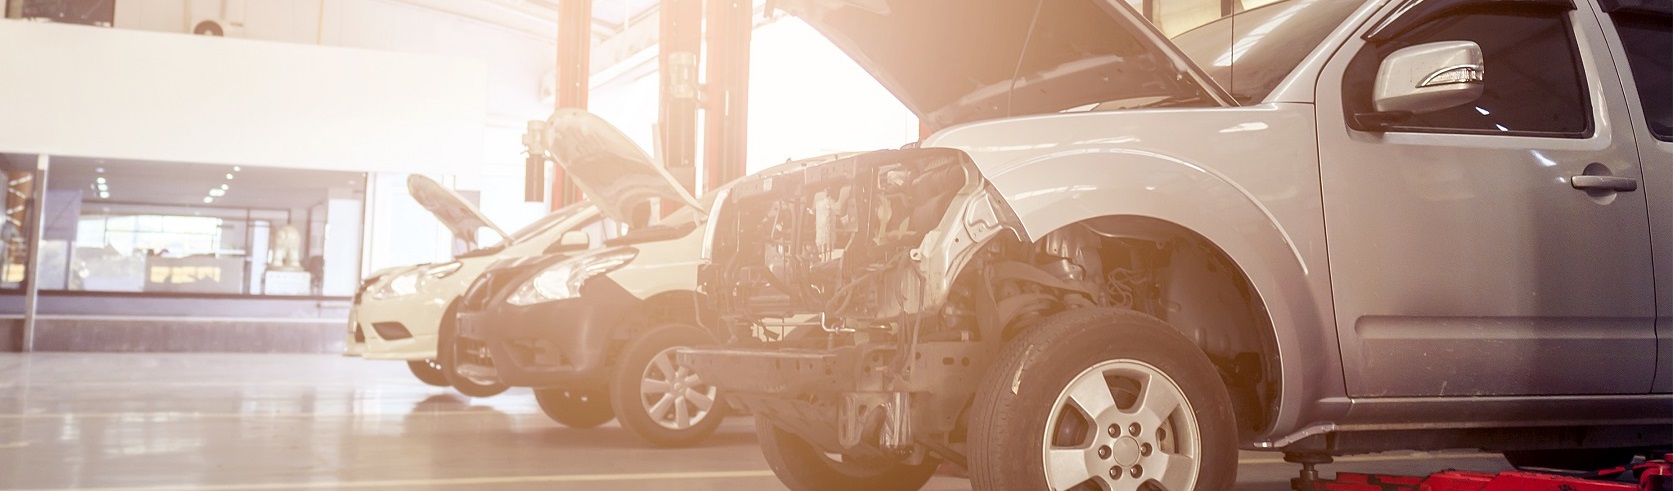 Common Myths About Collision Repairs Debunked